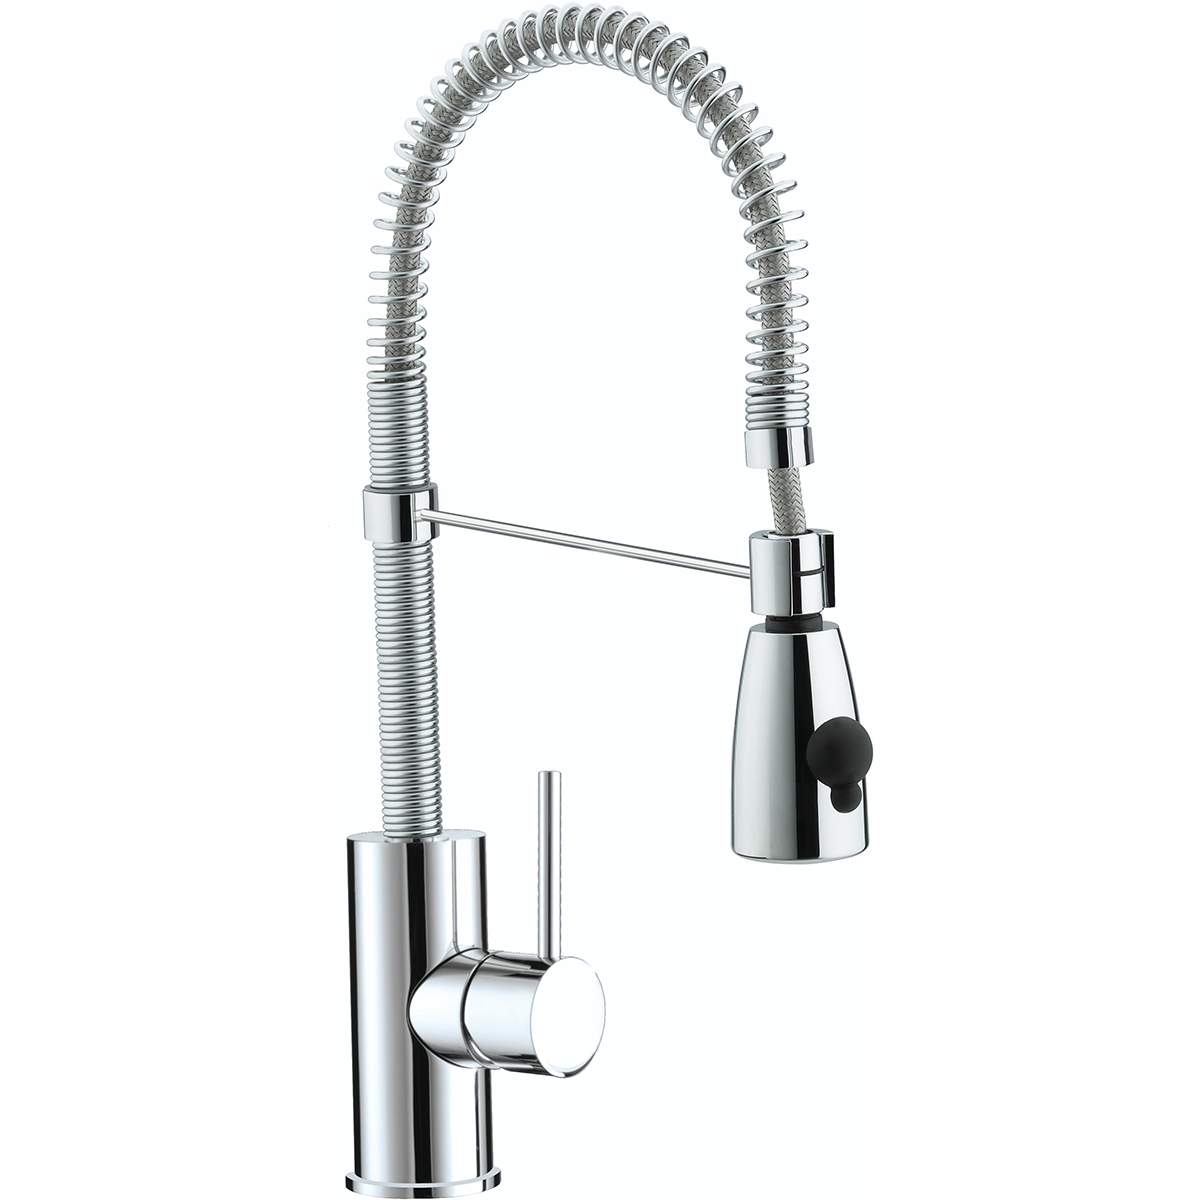 Bristan Target Sink Mixer with Pull-Out Spray (TG SNK C)